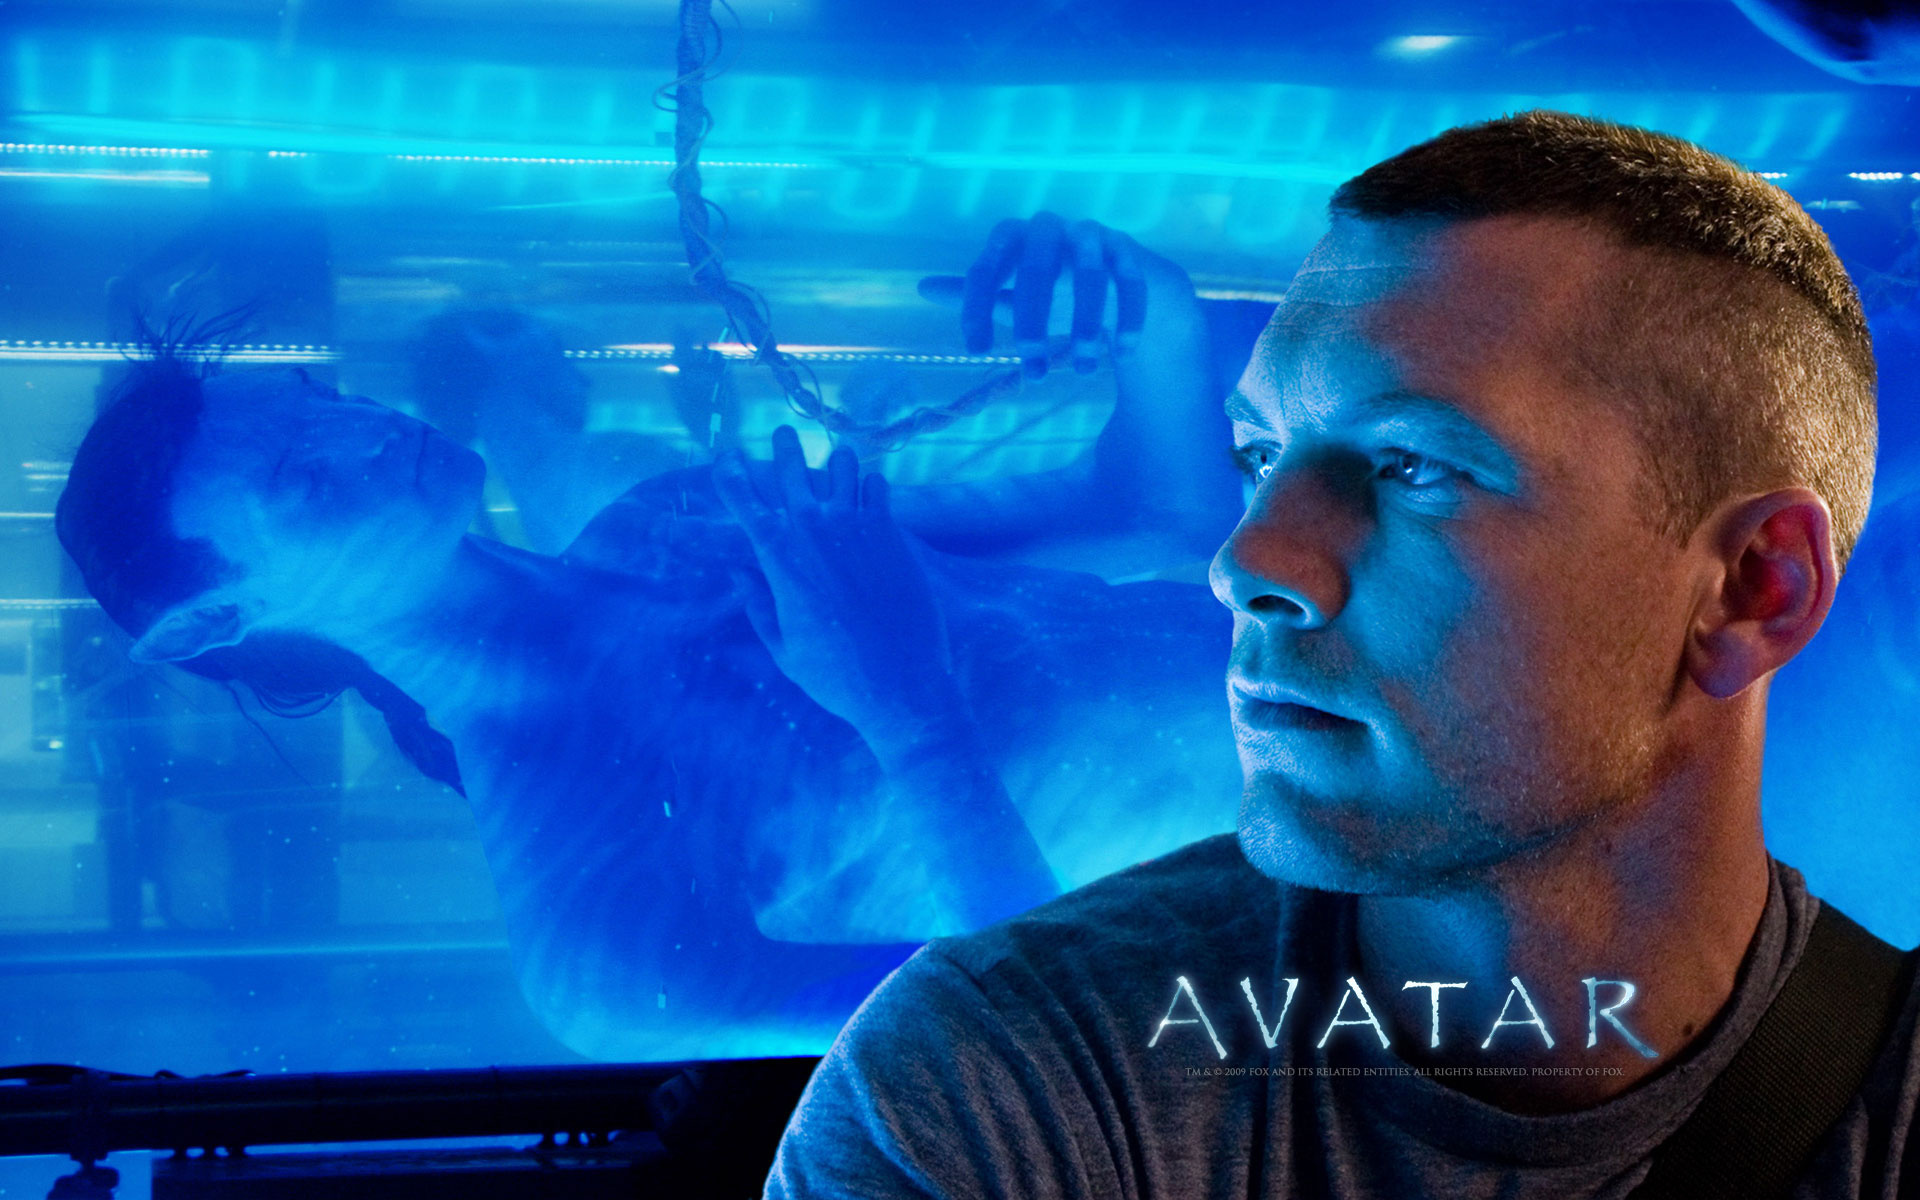 Sam Worthington: Corporal Jake Sully, a disabled former Marine, in James Cameron's Avatar. 1920x1200 HD Background.